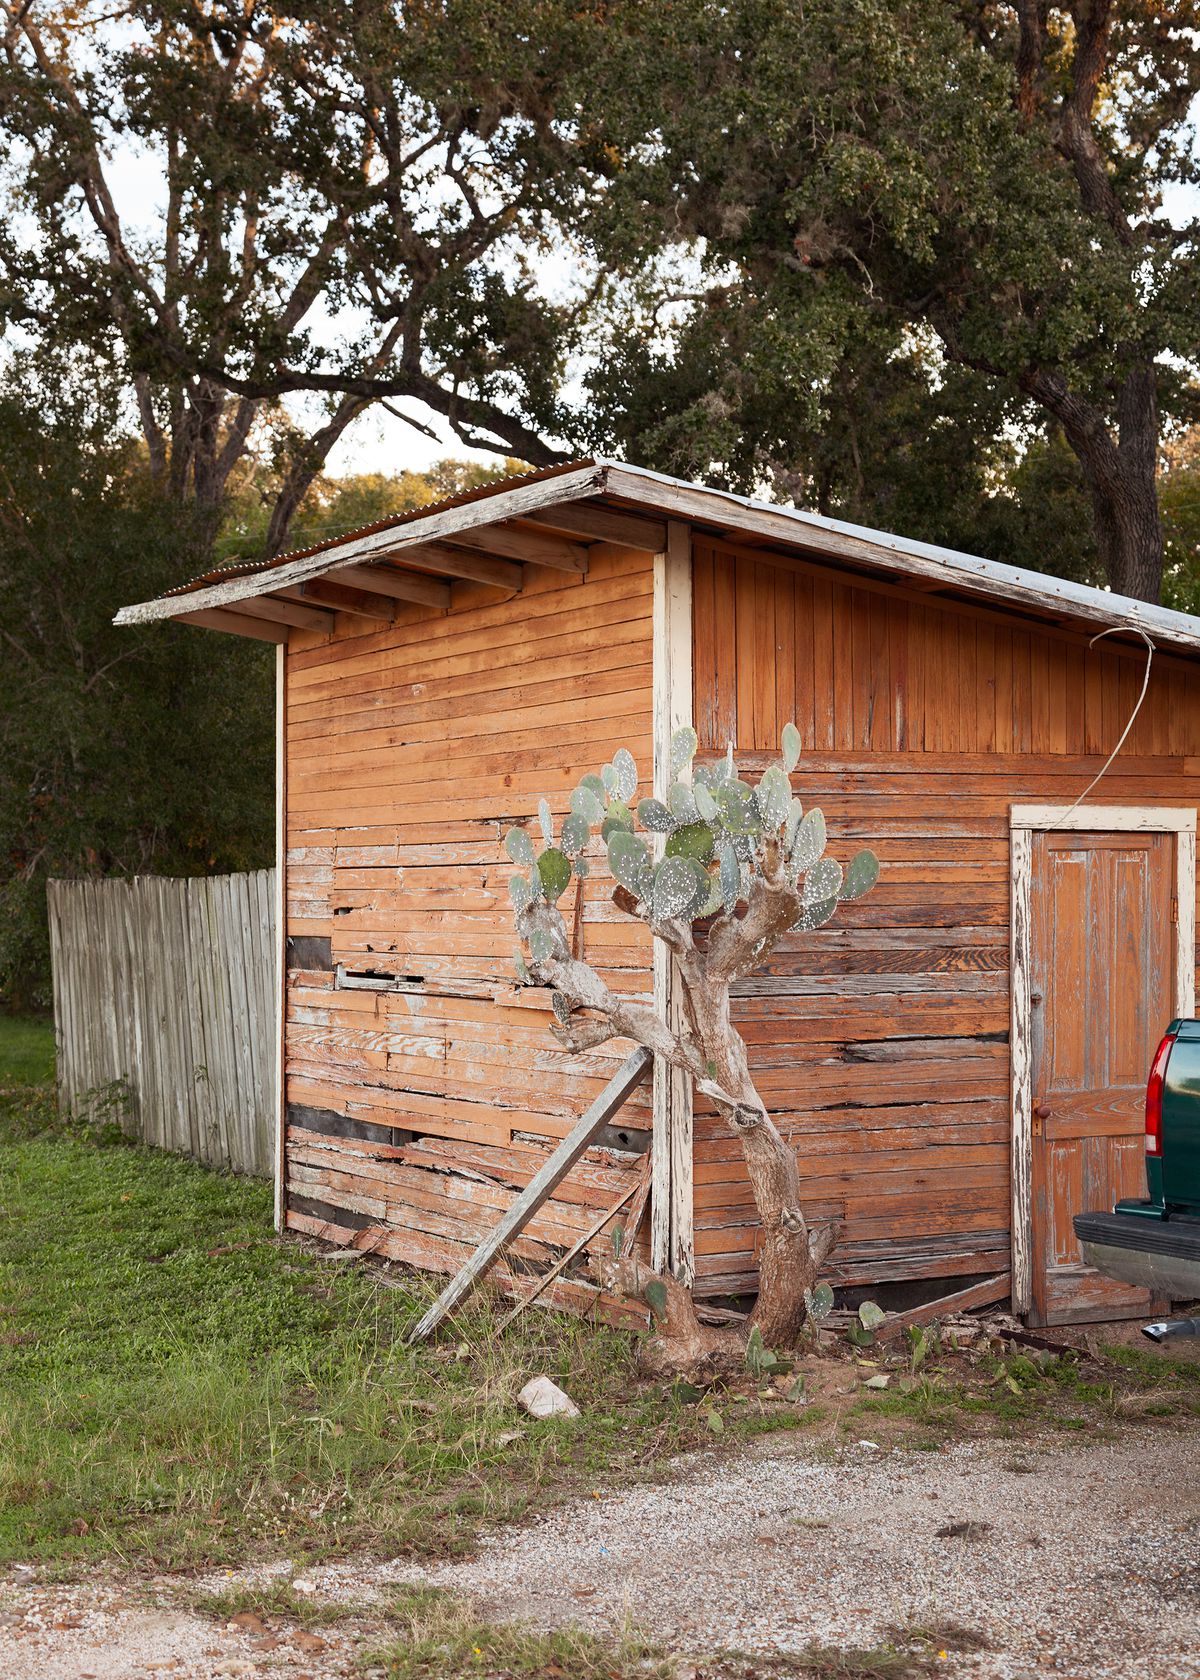 Driving through the towns between Austin and Louisiana - Curbed